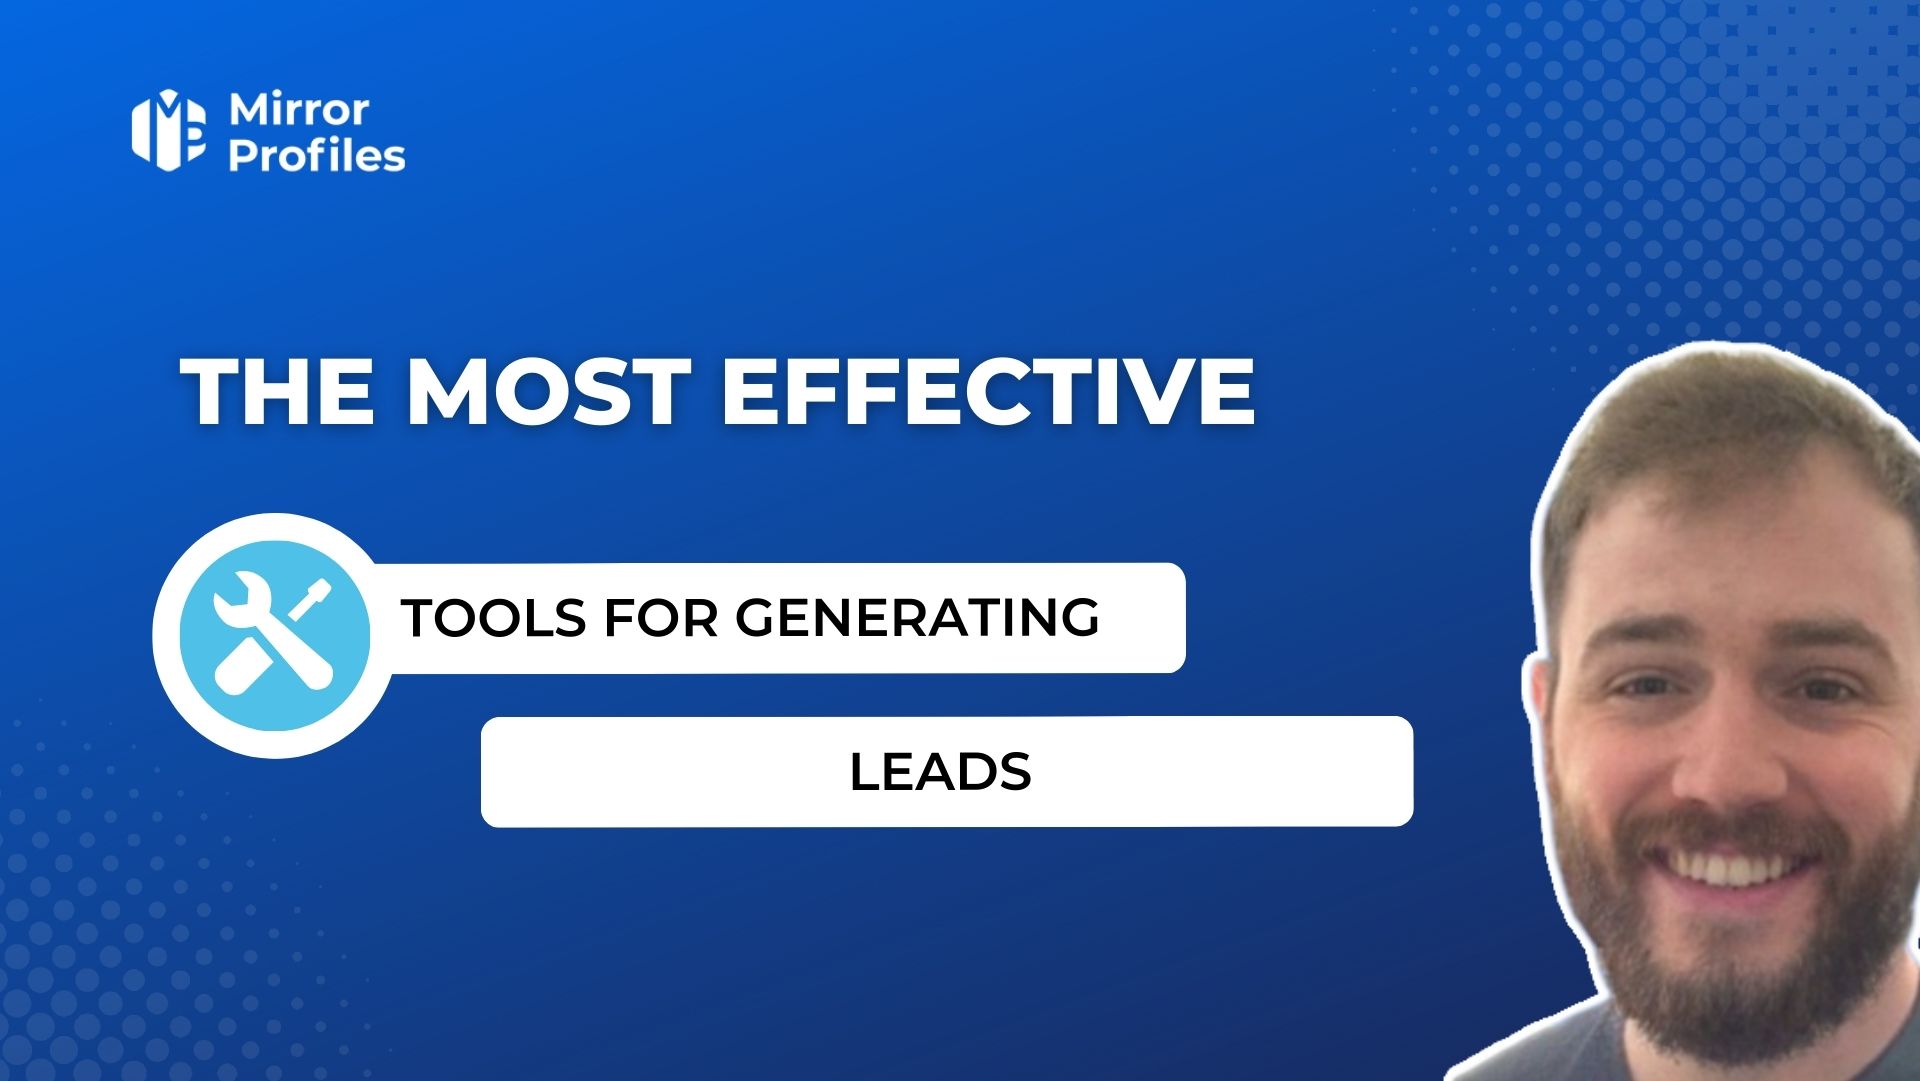 The most effective tools for generating leads